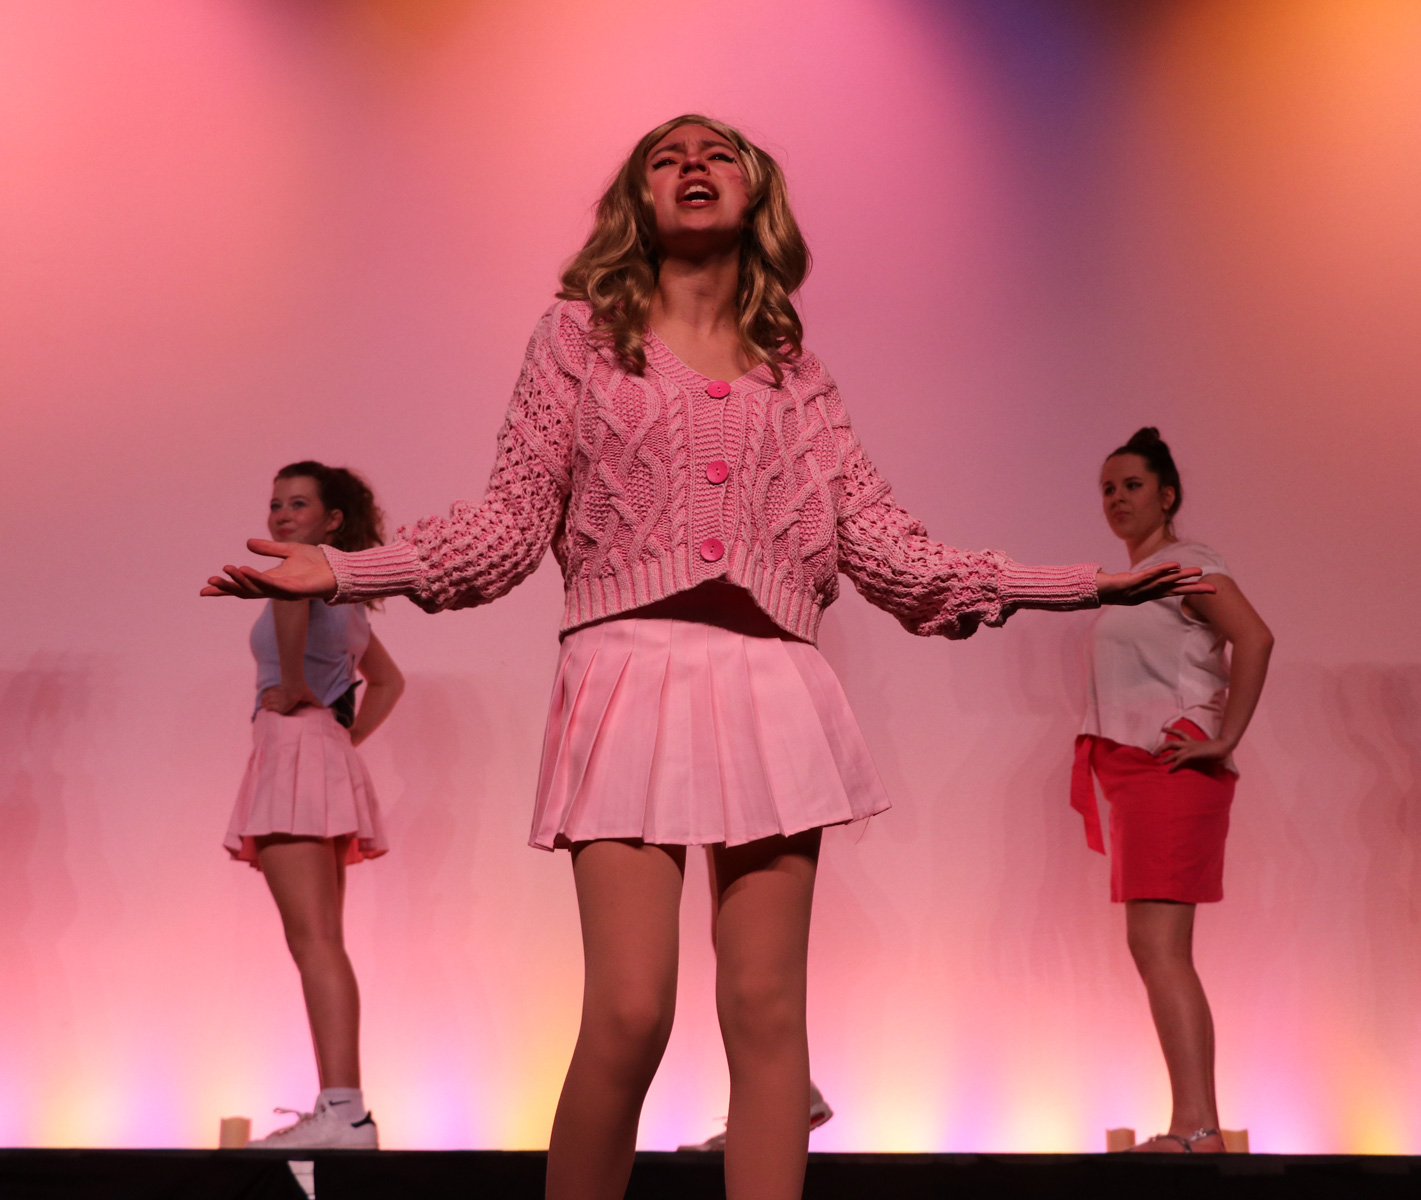 students singing on stage during legally blonde production at school